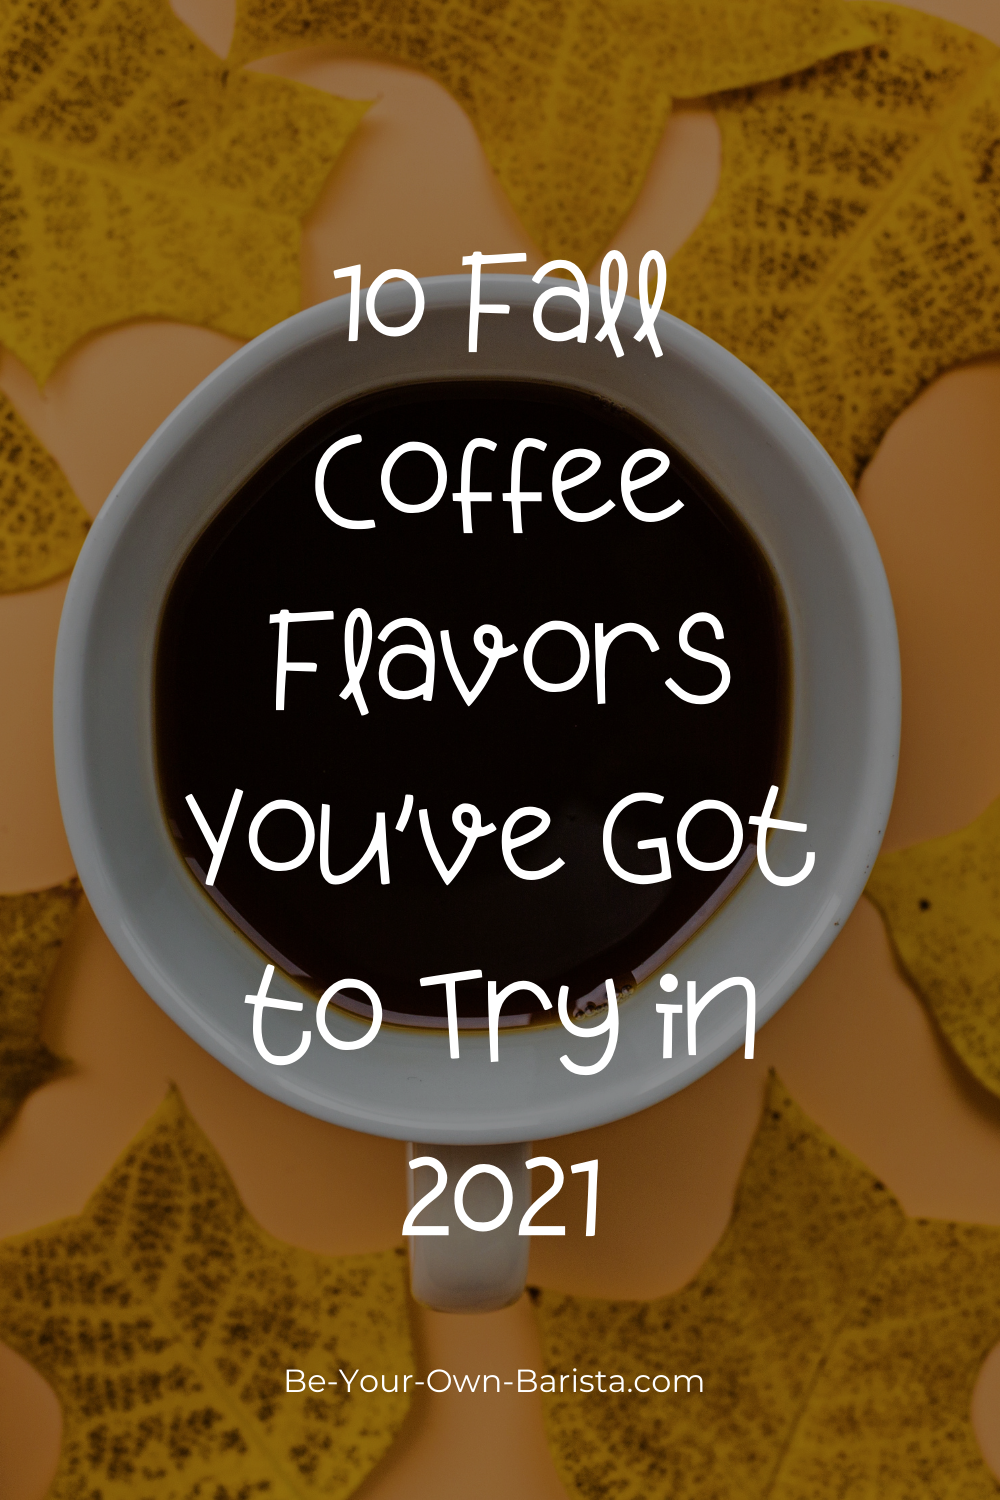 10 Fall Coffee Flavors You’ve Got to Try in 2021